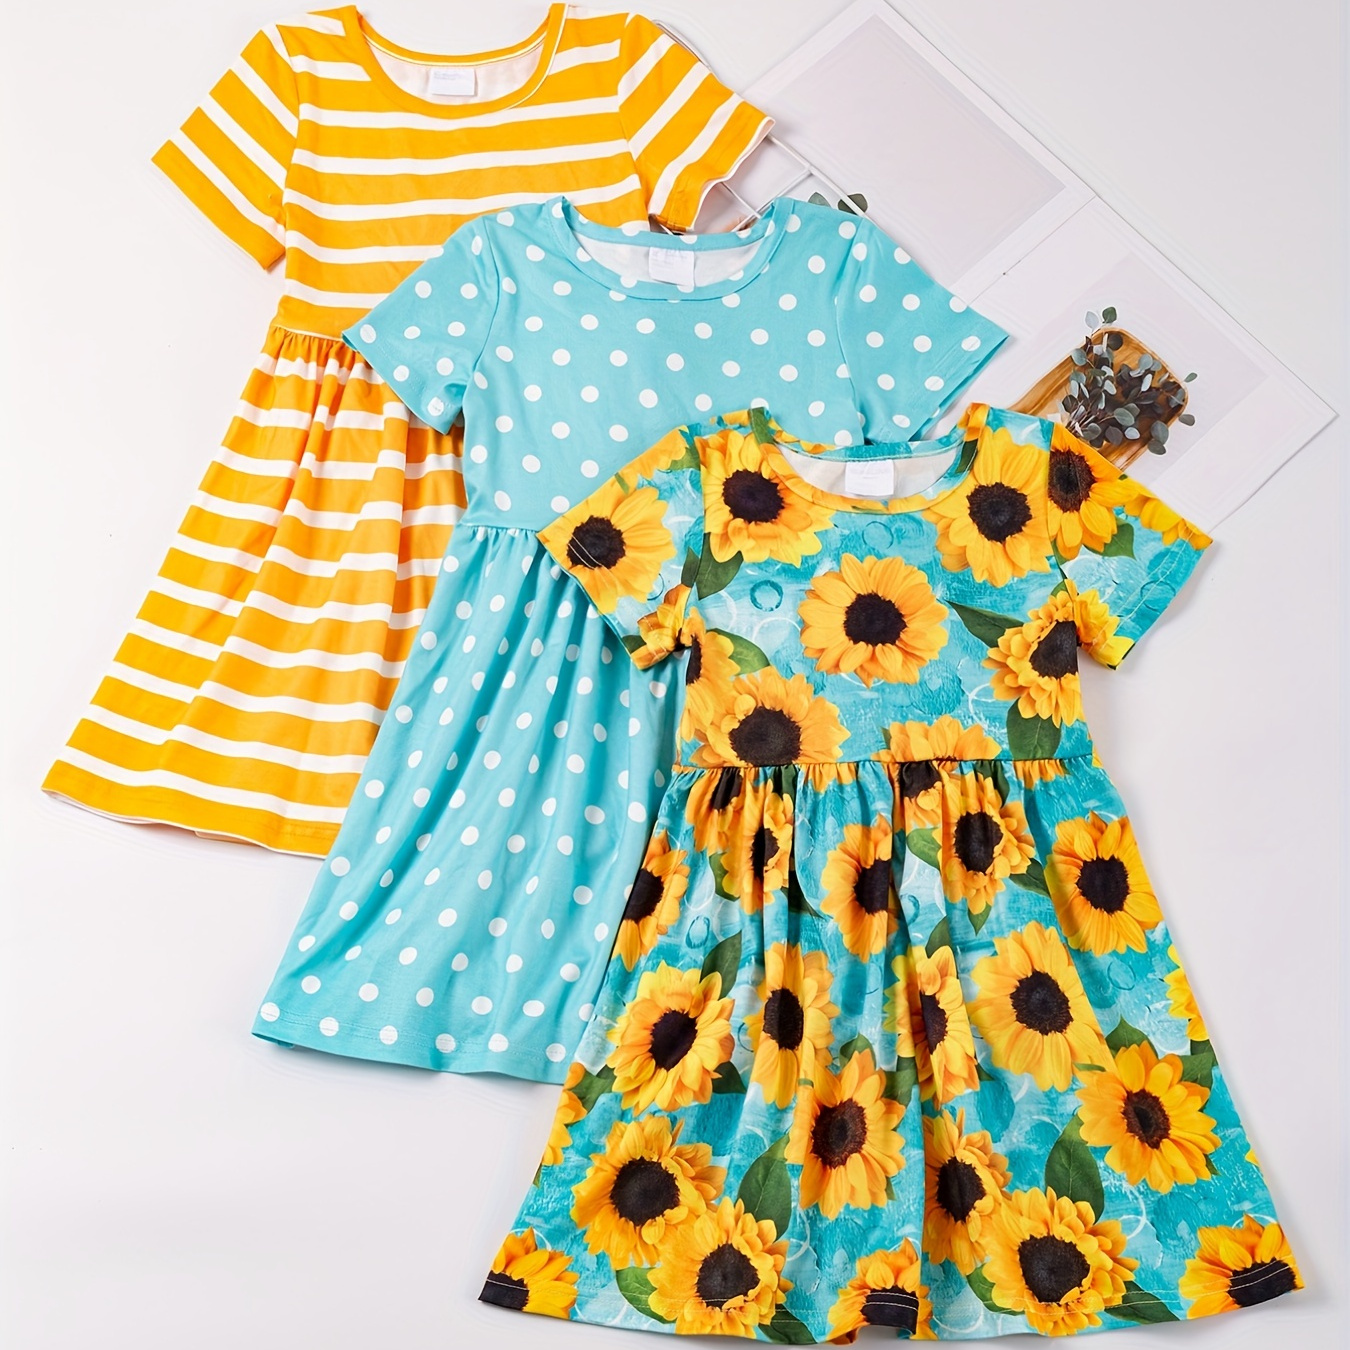 

3pcs/set Toddler Girls Short Sleeves Sunflower And Polka Dot Stripes Graphic Stretch Casual Princess Dress For Party Beach Vacation Kids Summer Clothes